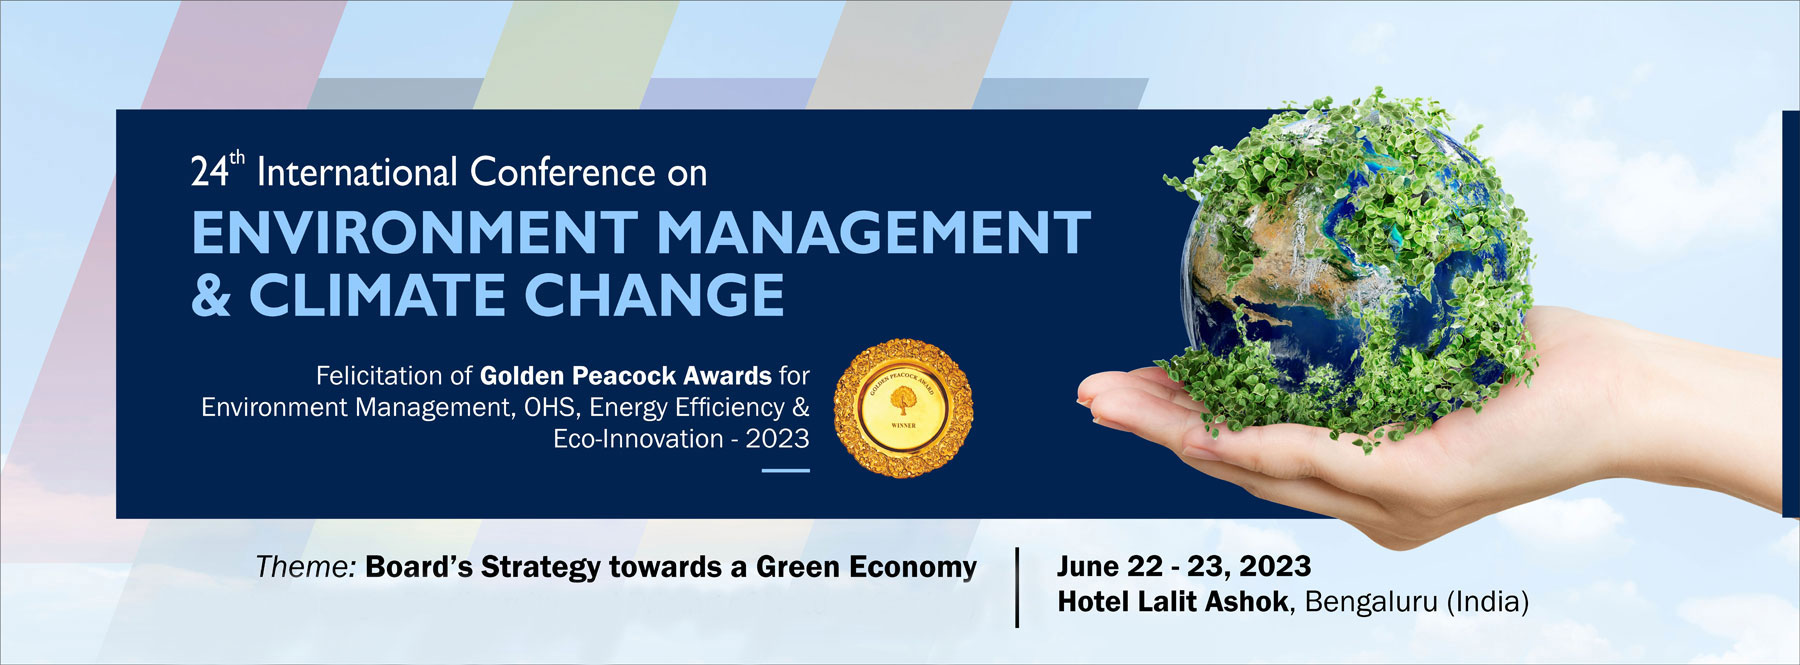 24th International Conference on Environment Management and Climate Change